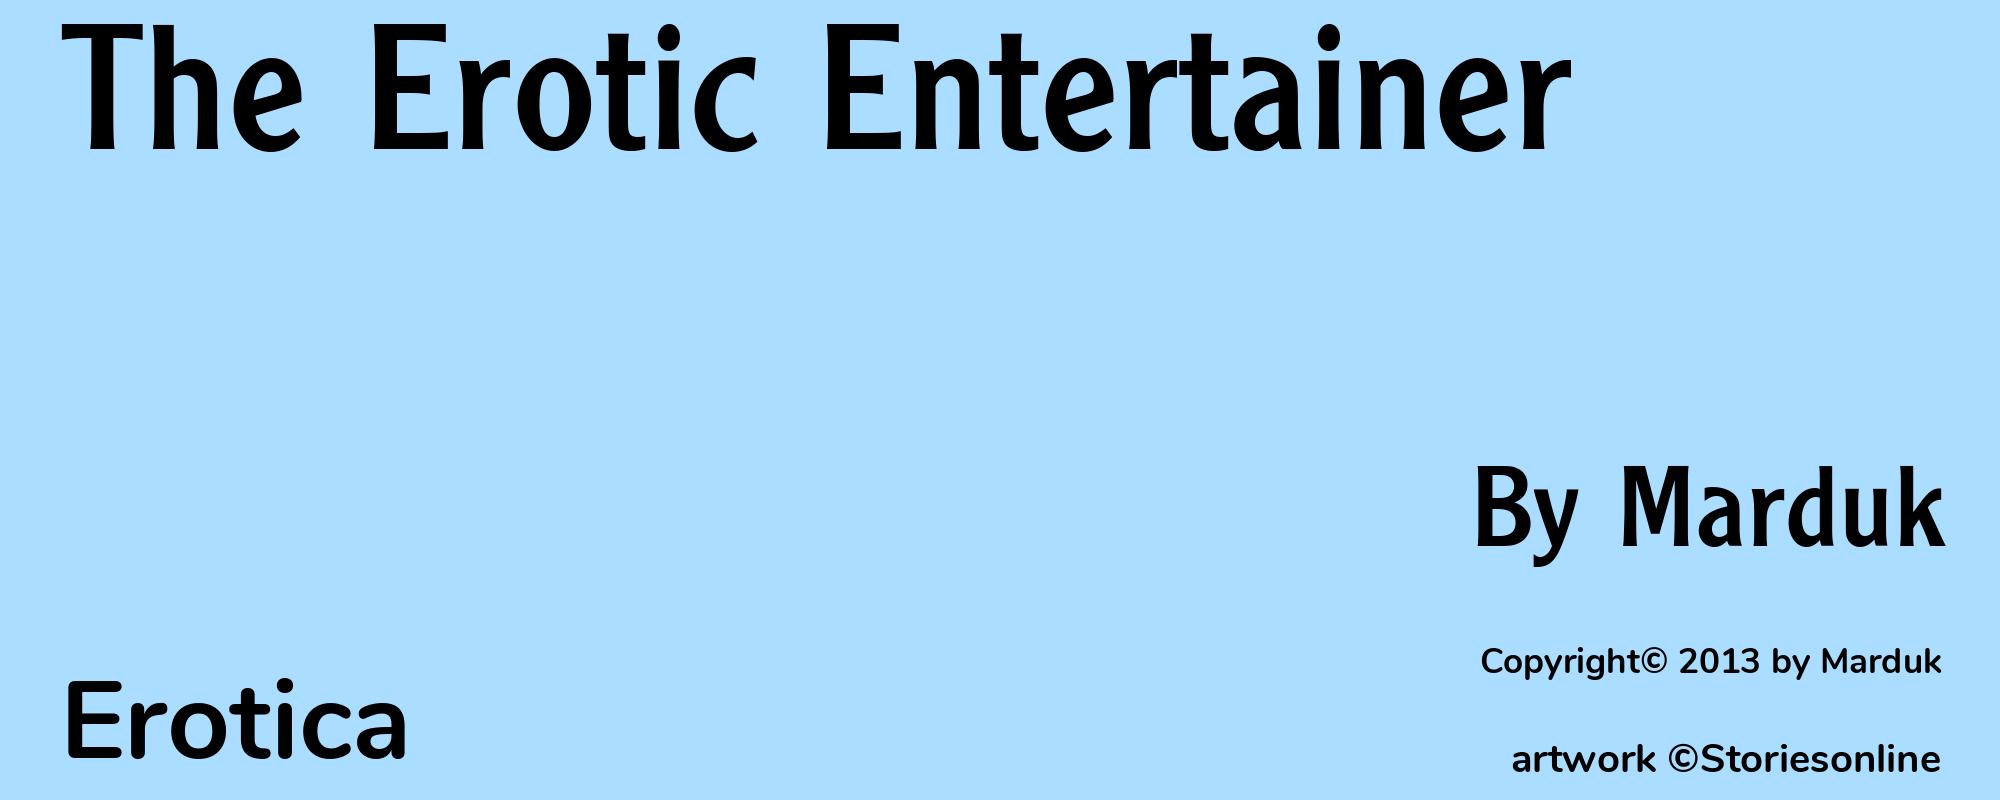 The Erotic Entertainer - Cover